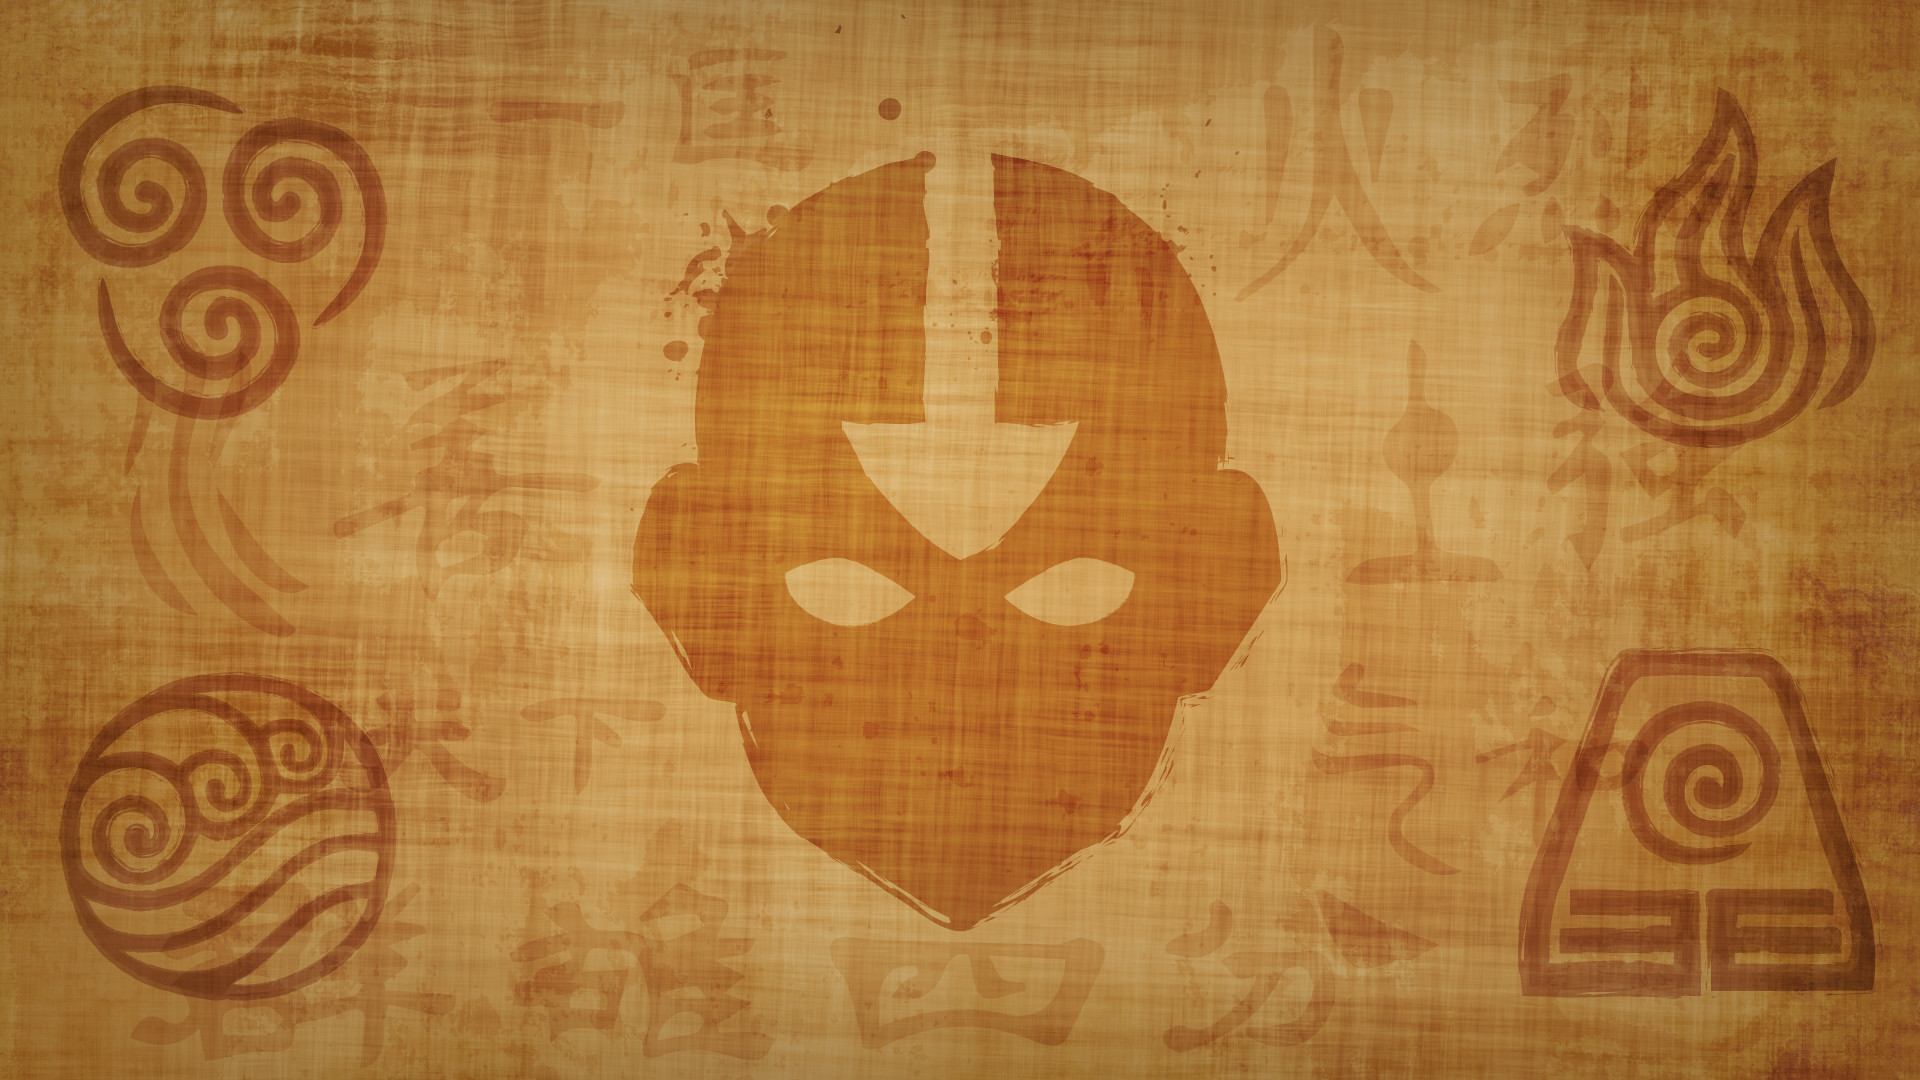 1920x1080 ... Avatar - The Last Airbender Wallpaper . I can make any  resolution if requested, I'll be waiting. Feedback would be much apreciated.